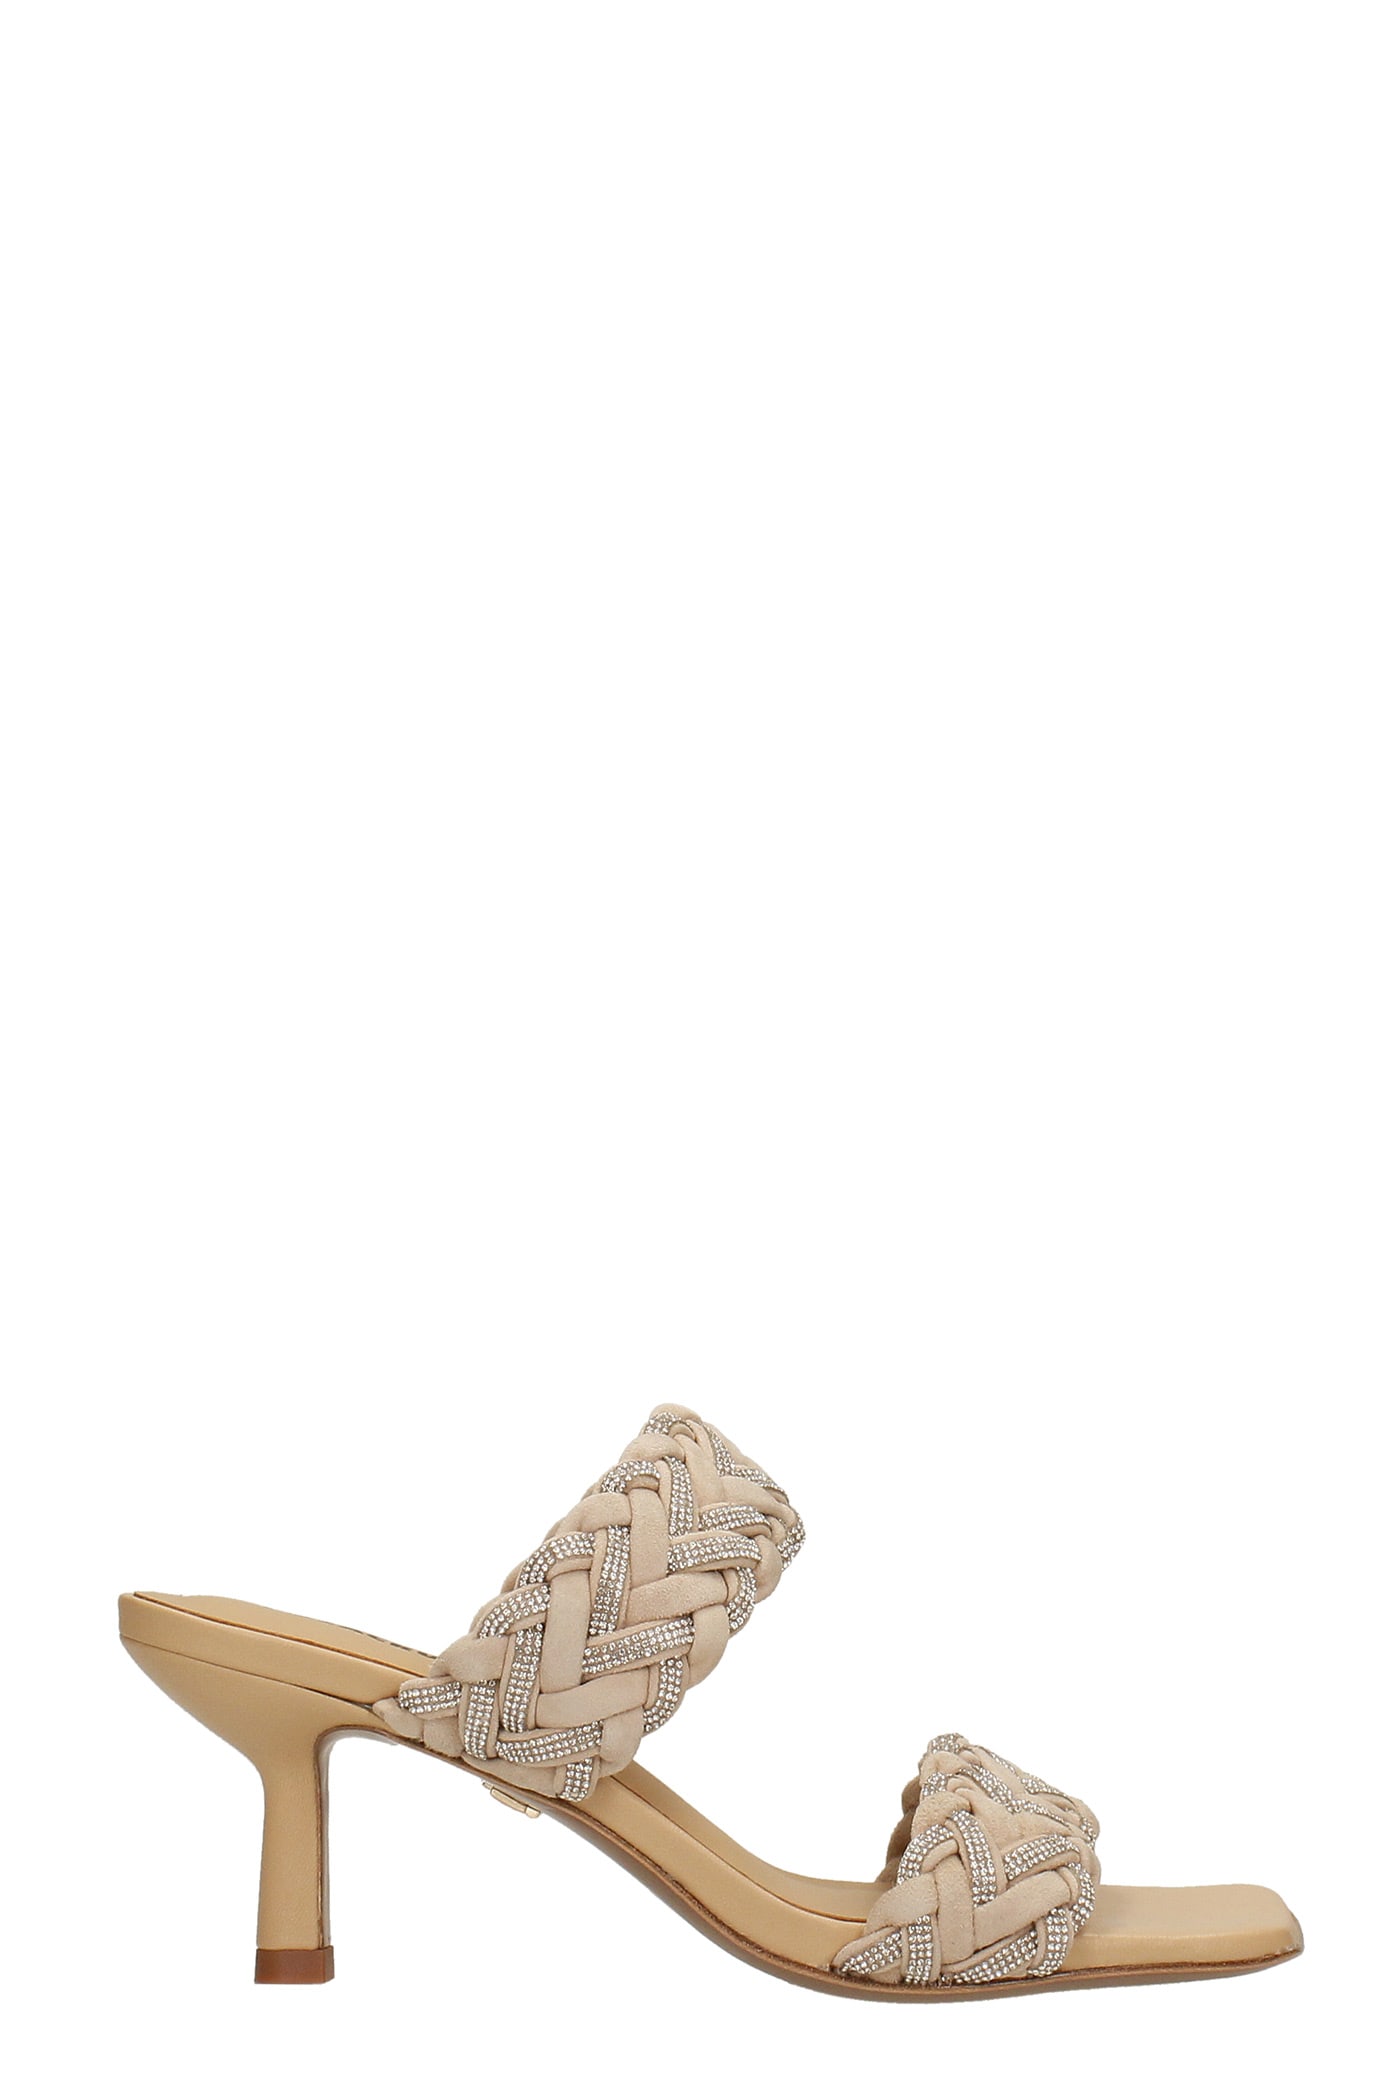 Lola Cruz Sandals In Powder Suede And Leather